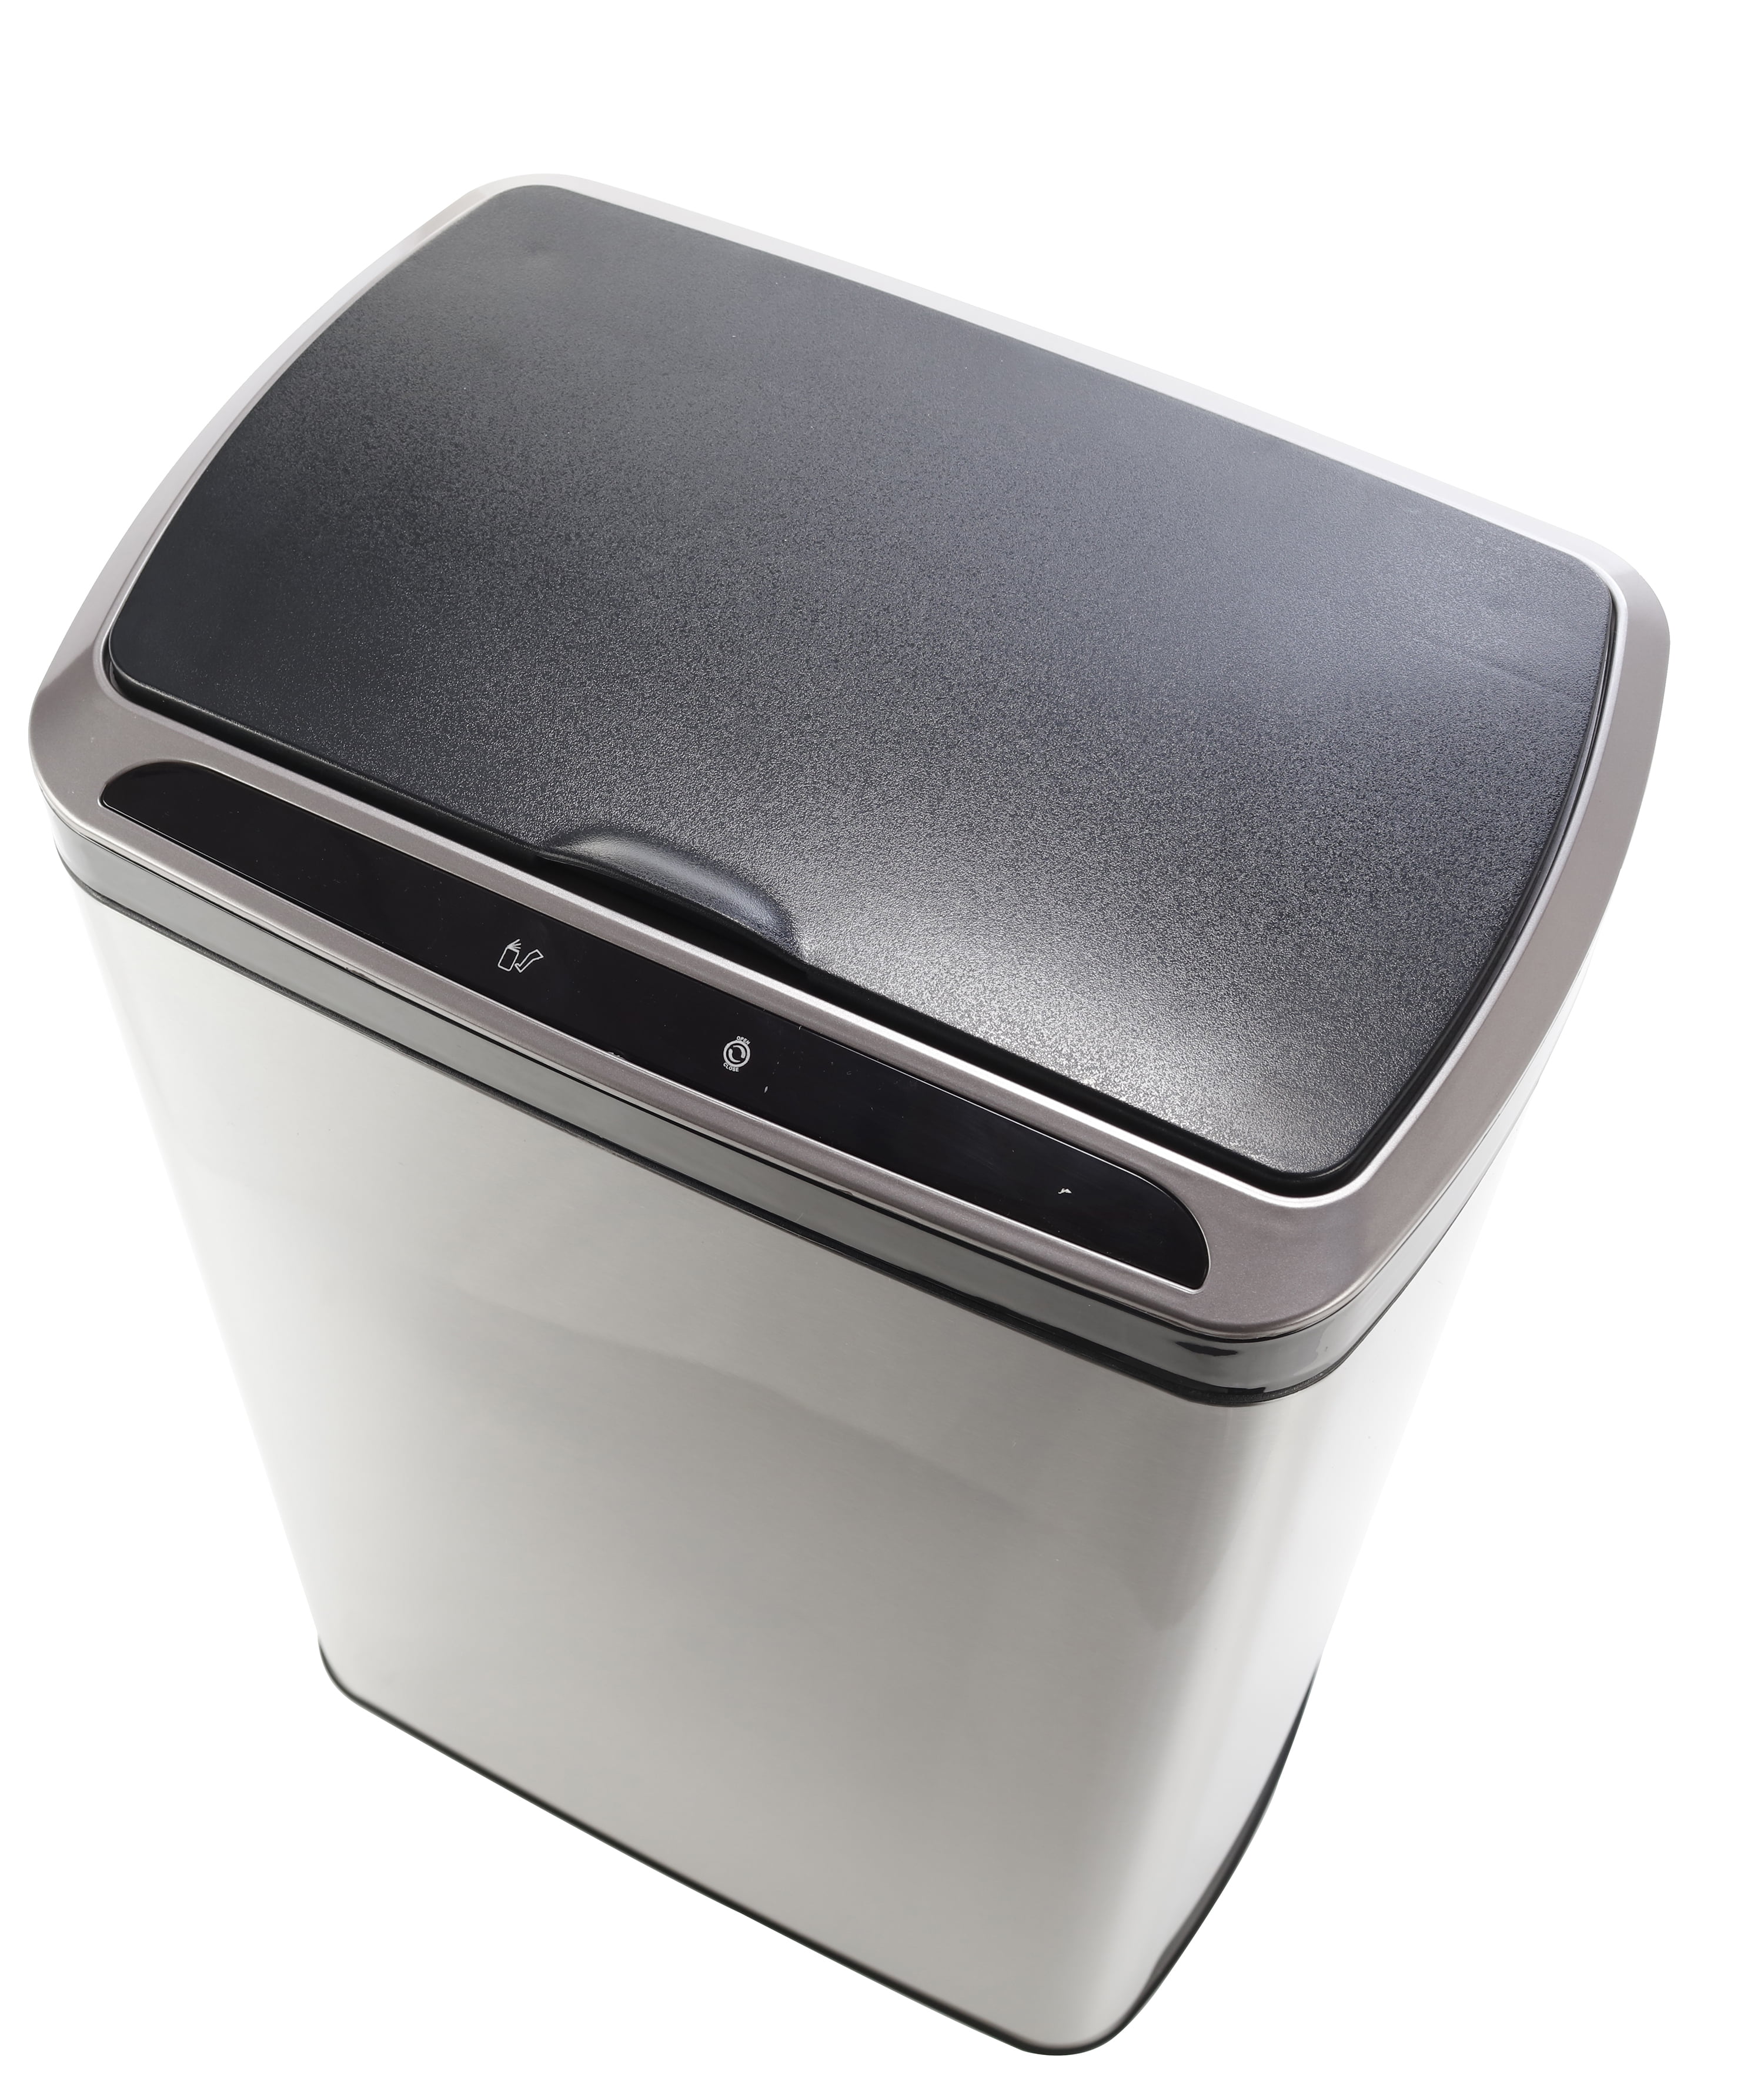 LC HOME 13 Gallons Steel Motion Sensor Trash Can & Reviews